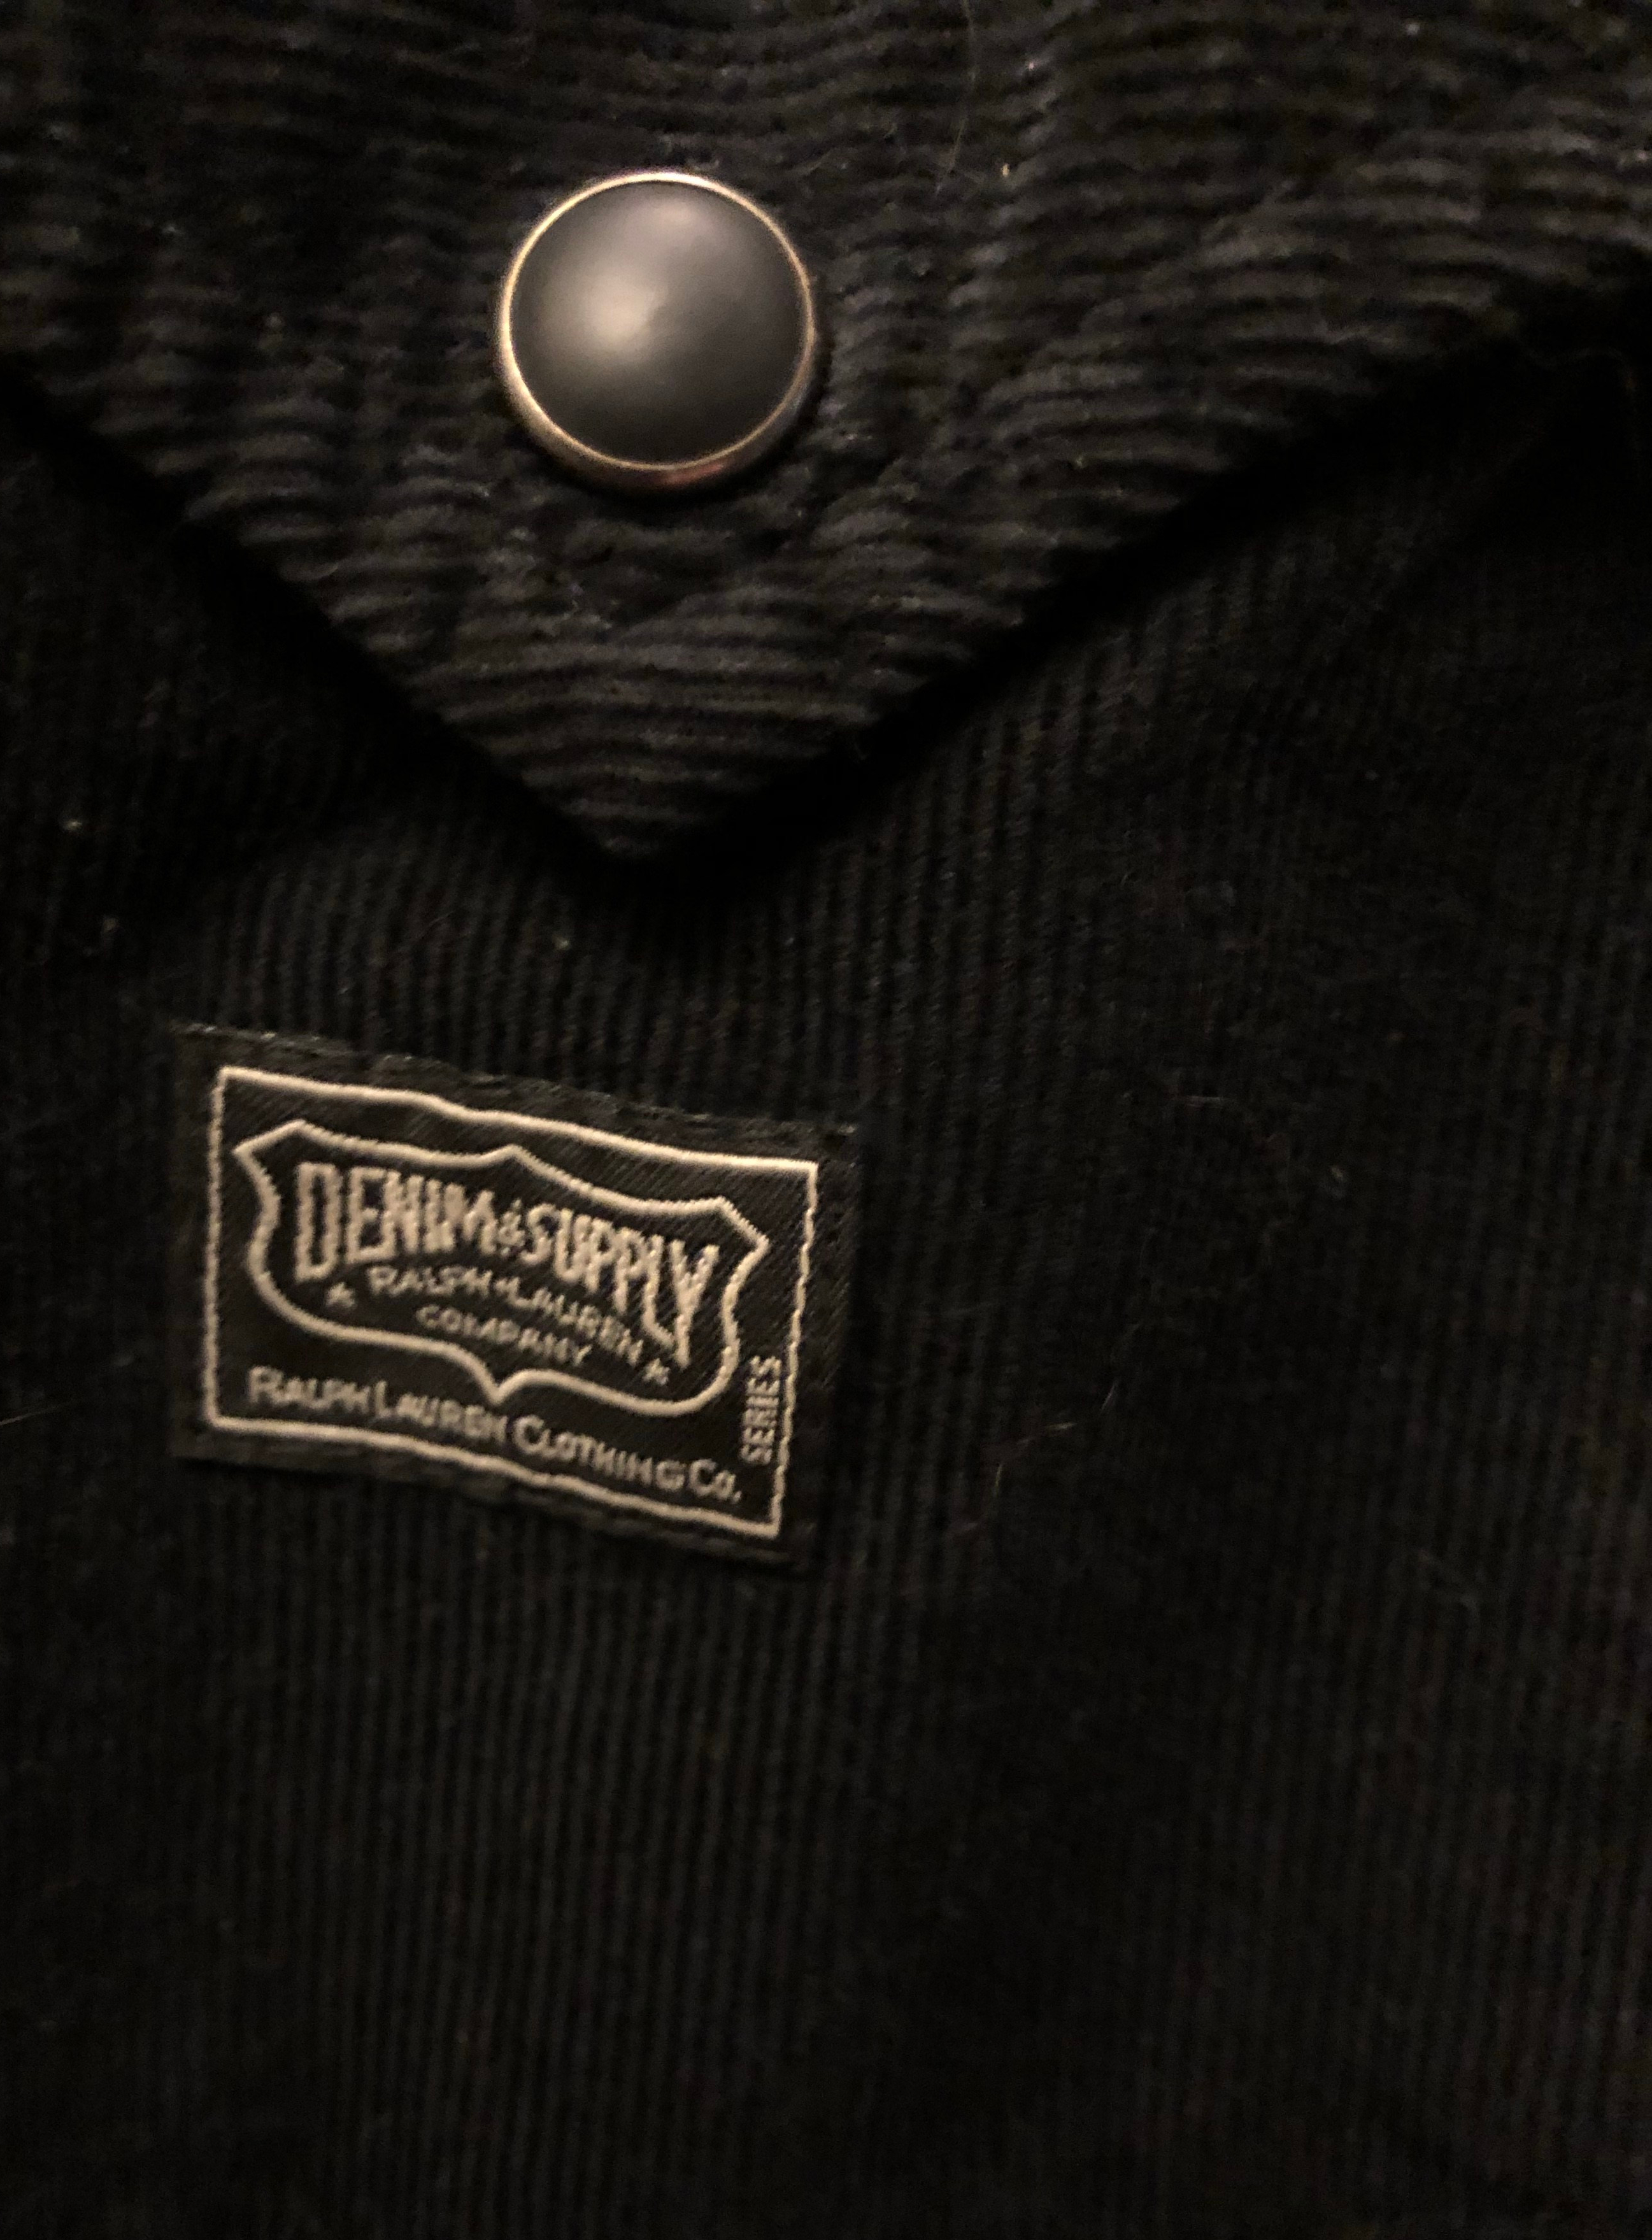 Ralph Lauren Corp. to incorporate Denim & Supply within Polo brand